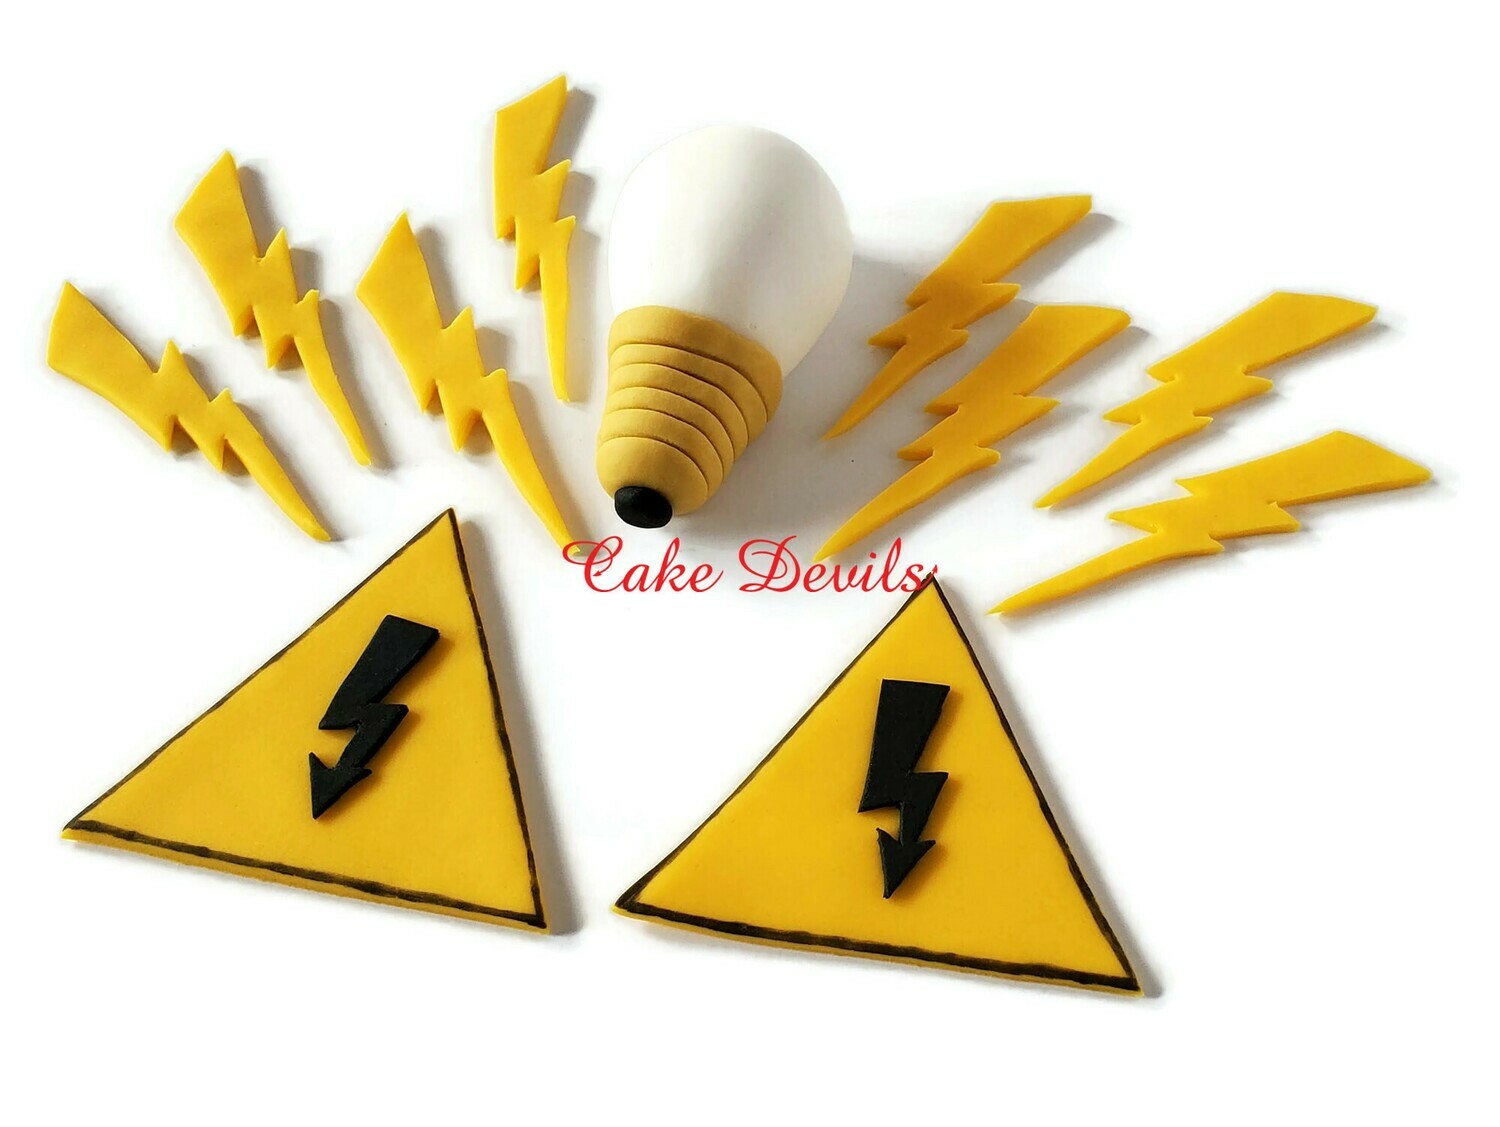 Electric fondant cake toppers, great for the electrician in your life!